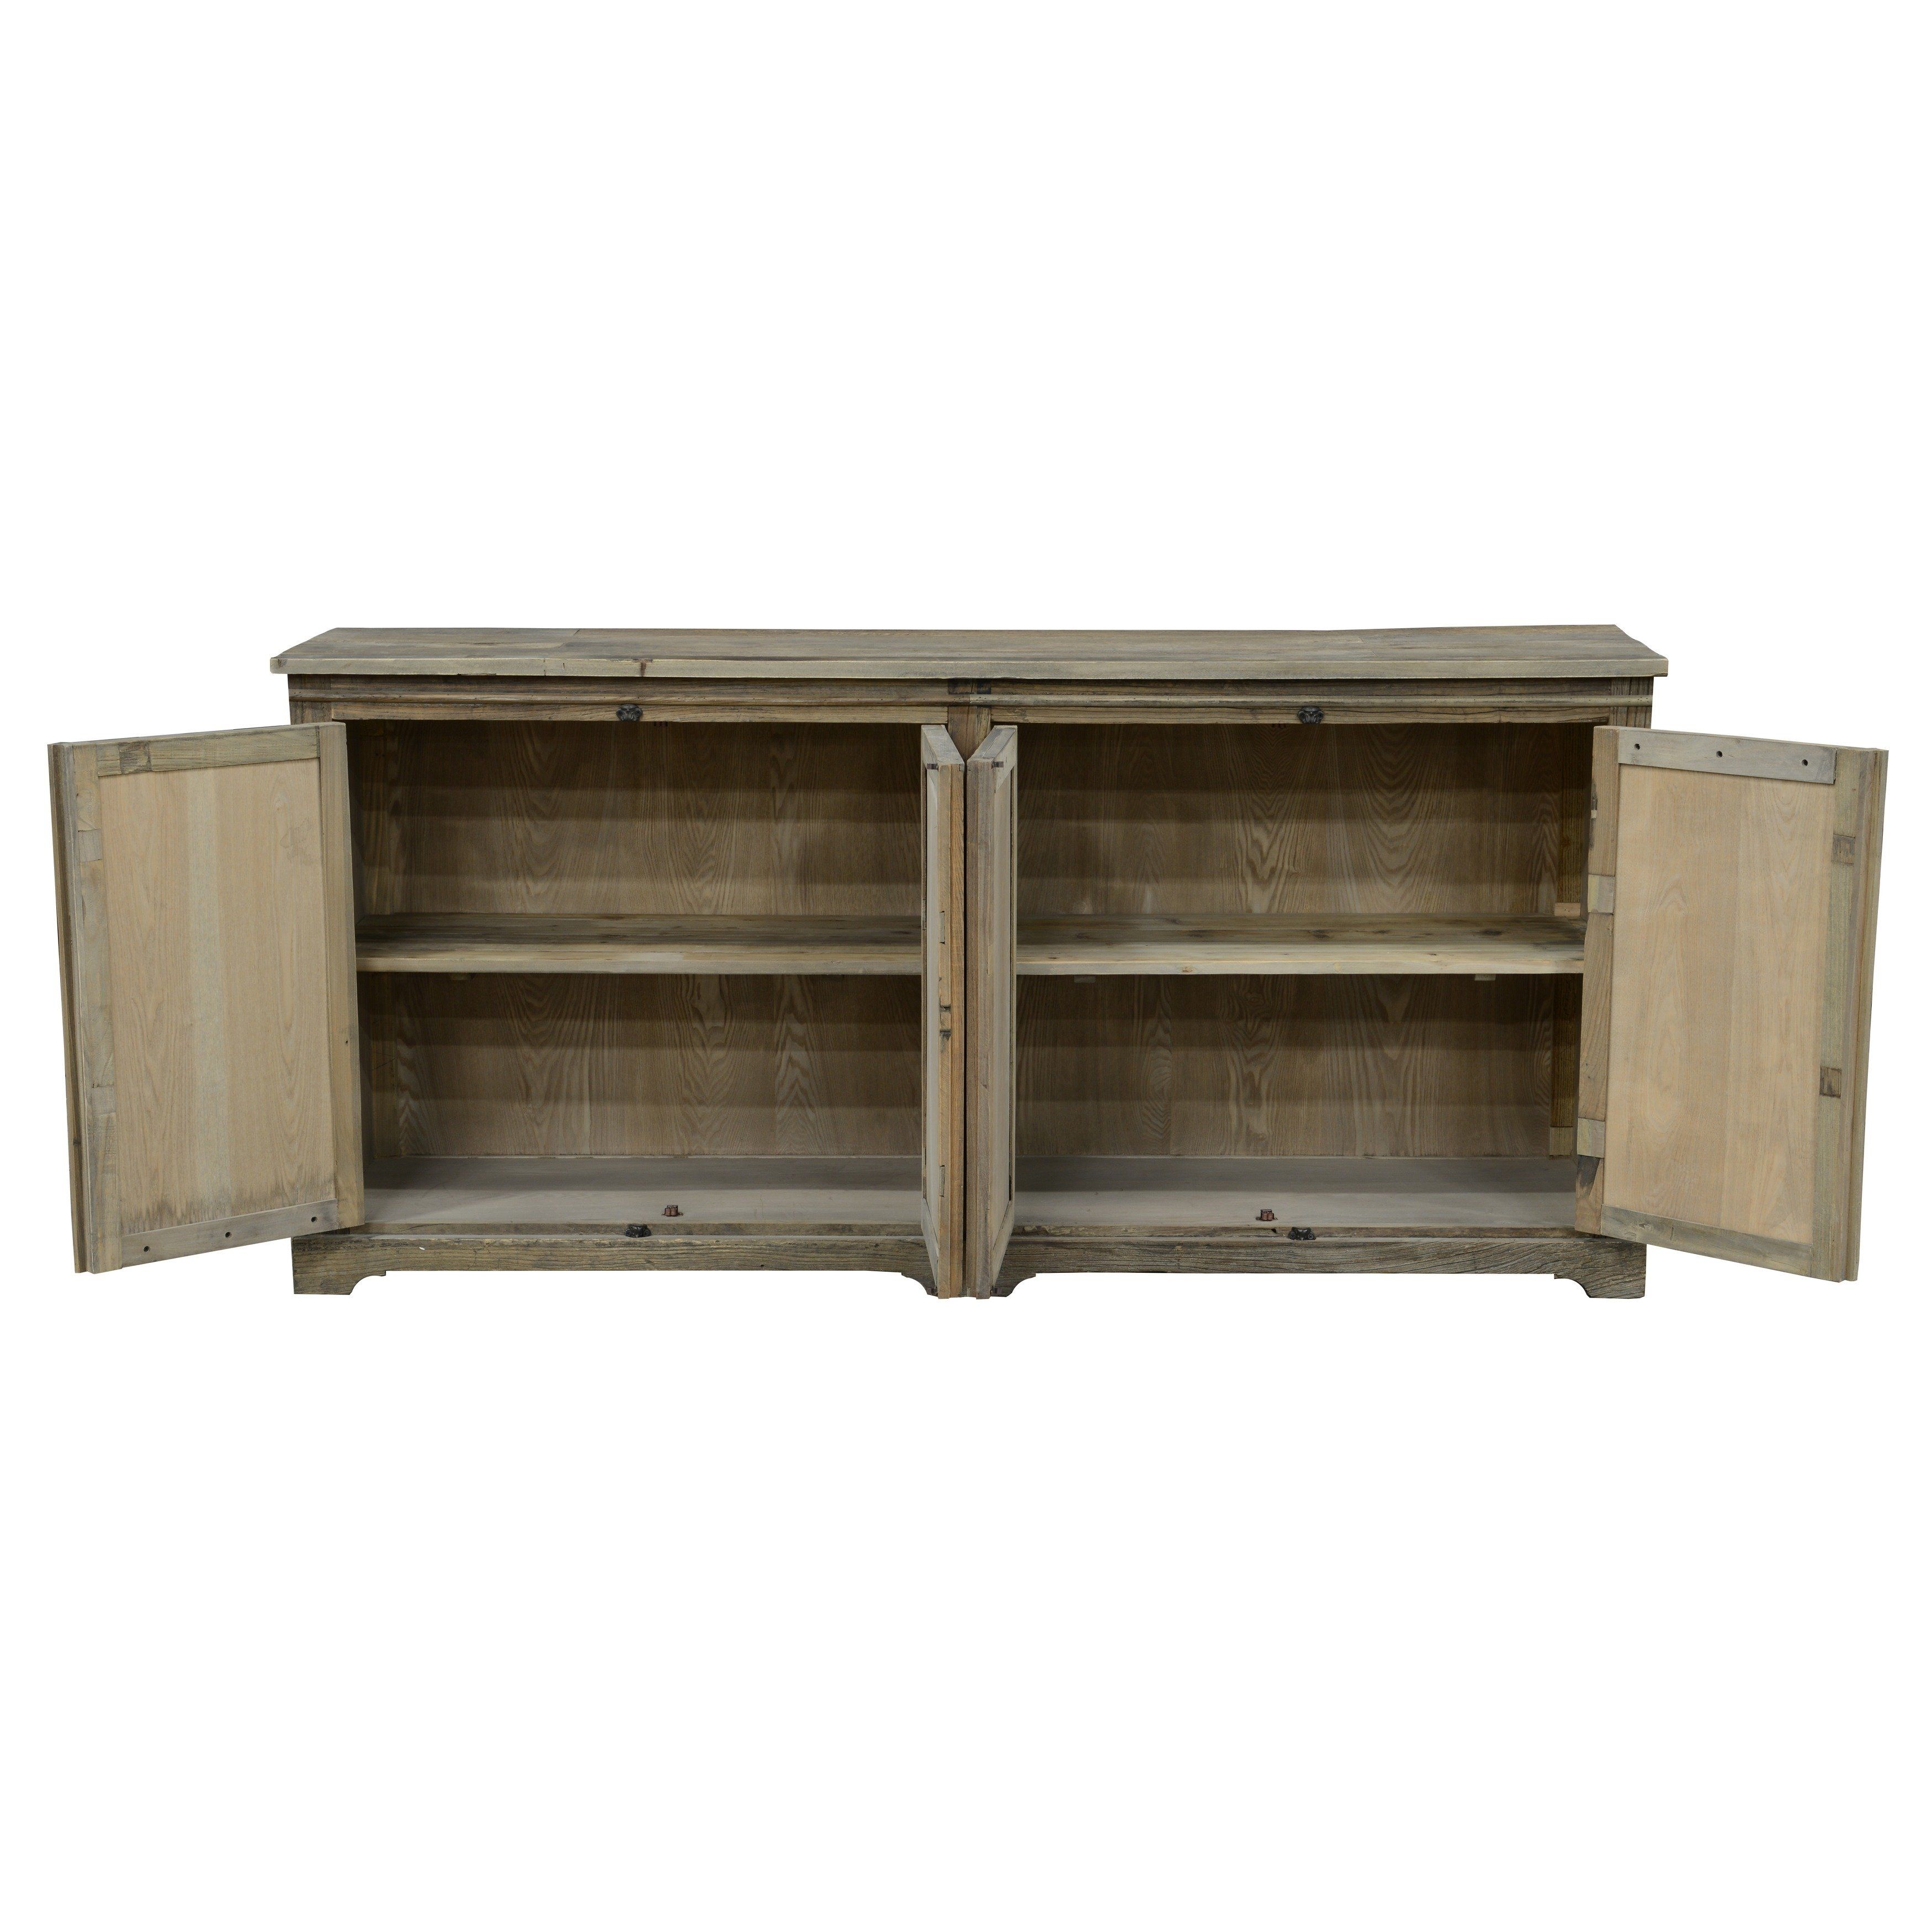 Shop Bradley Reclaimed Wood Mirrored 78 Inch Sideboardkosas Home Intended For Most Recently Released Natural Oak Wood 78 Inch Sideboards (View 9 of 20)